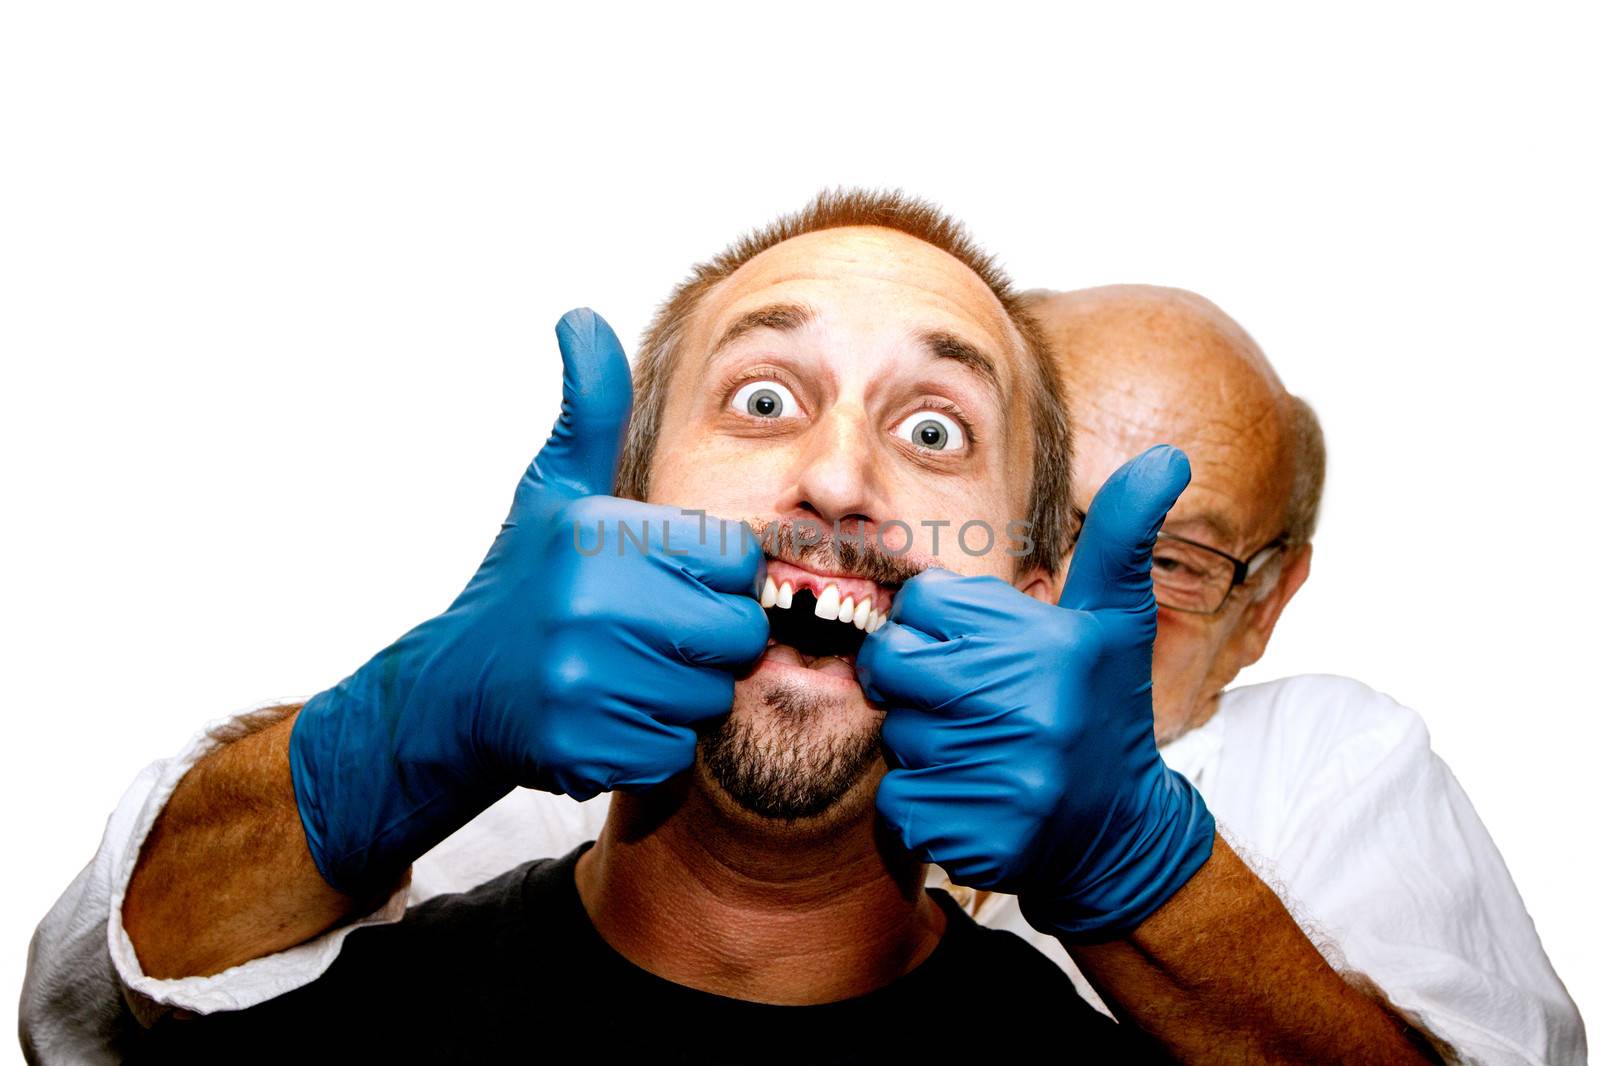 Avoid This Dentist at All Cost! by 805promo